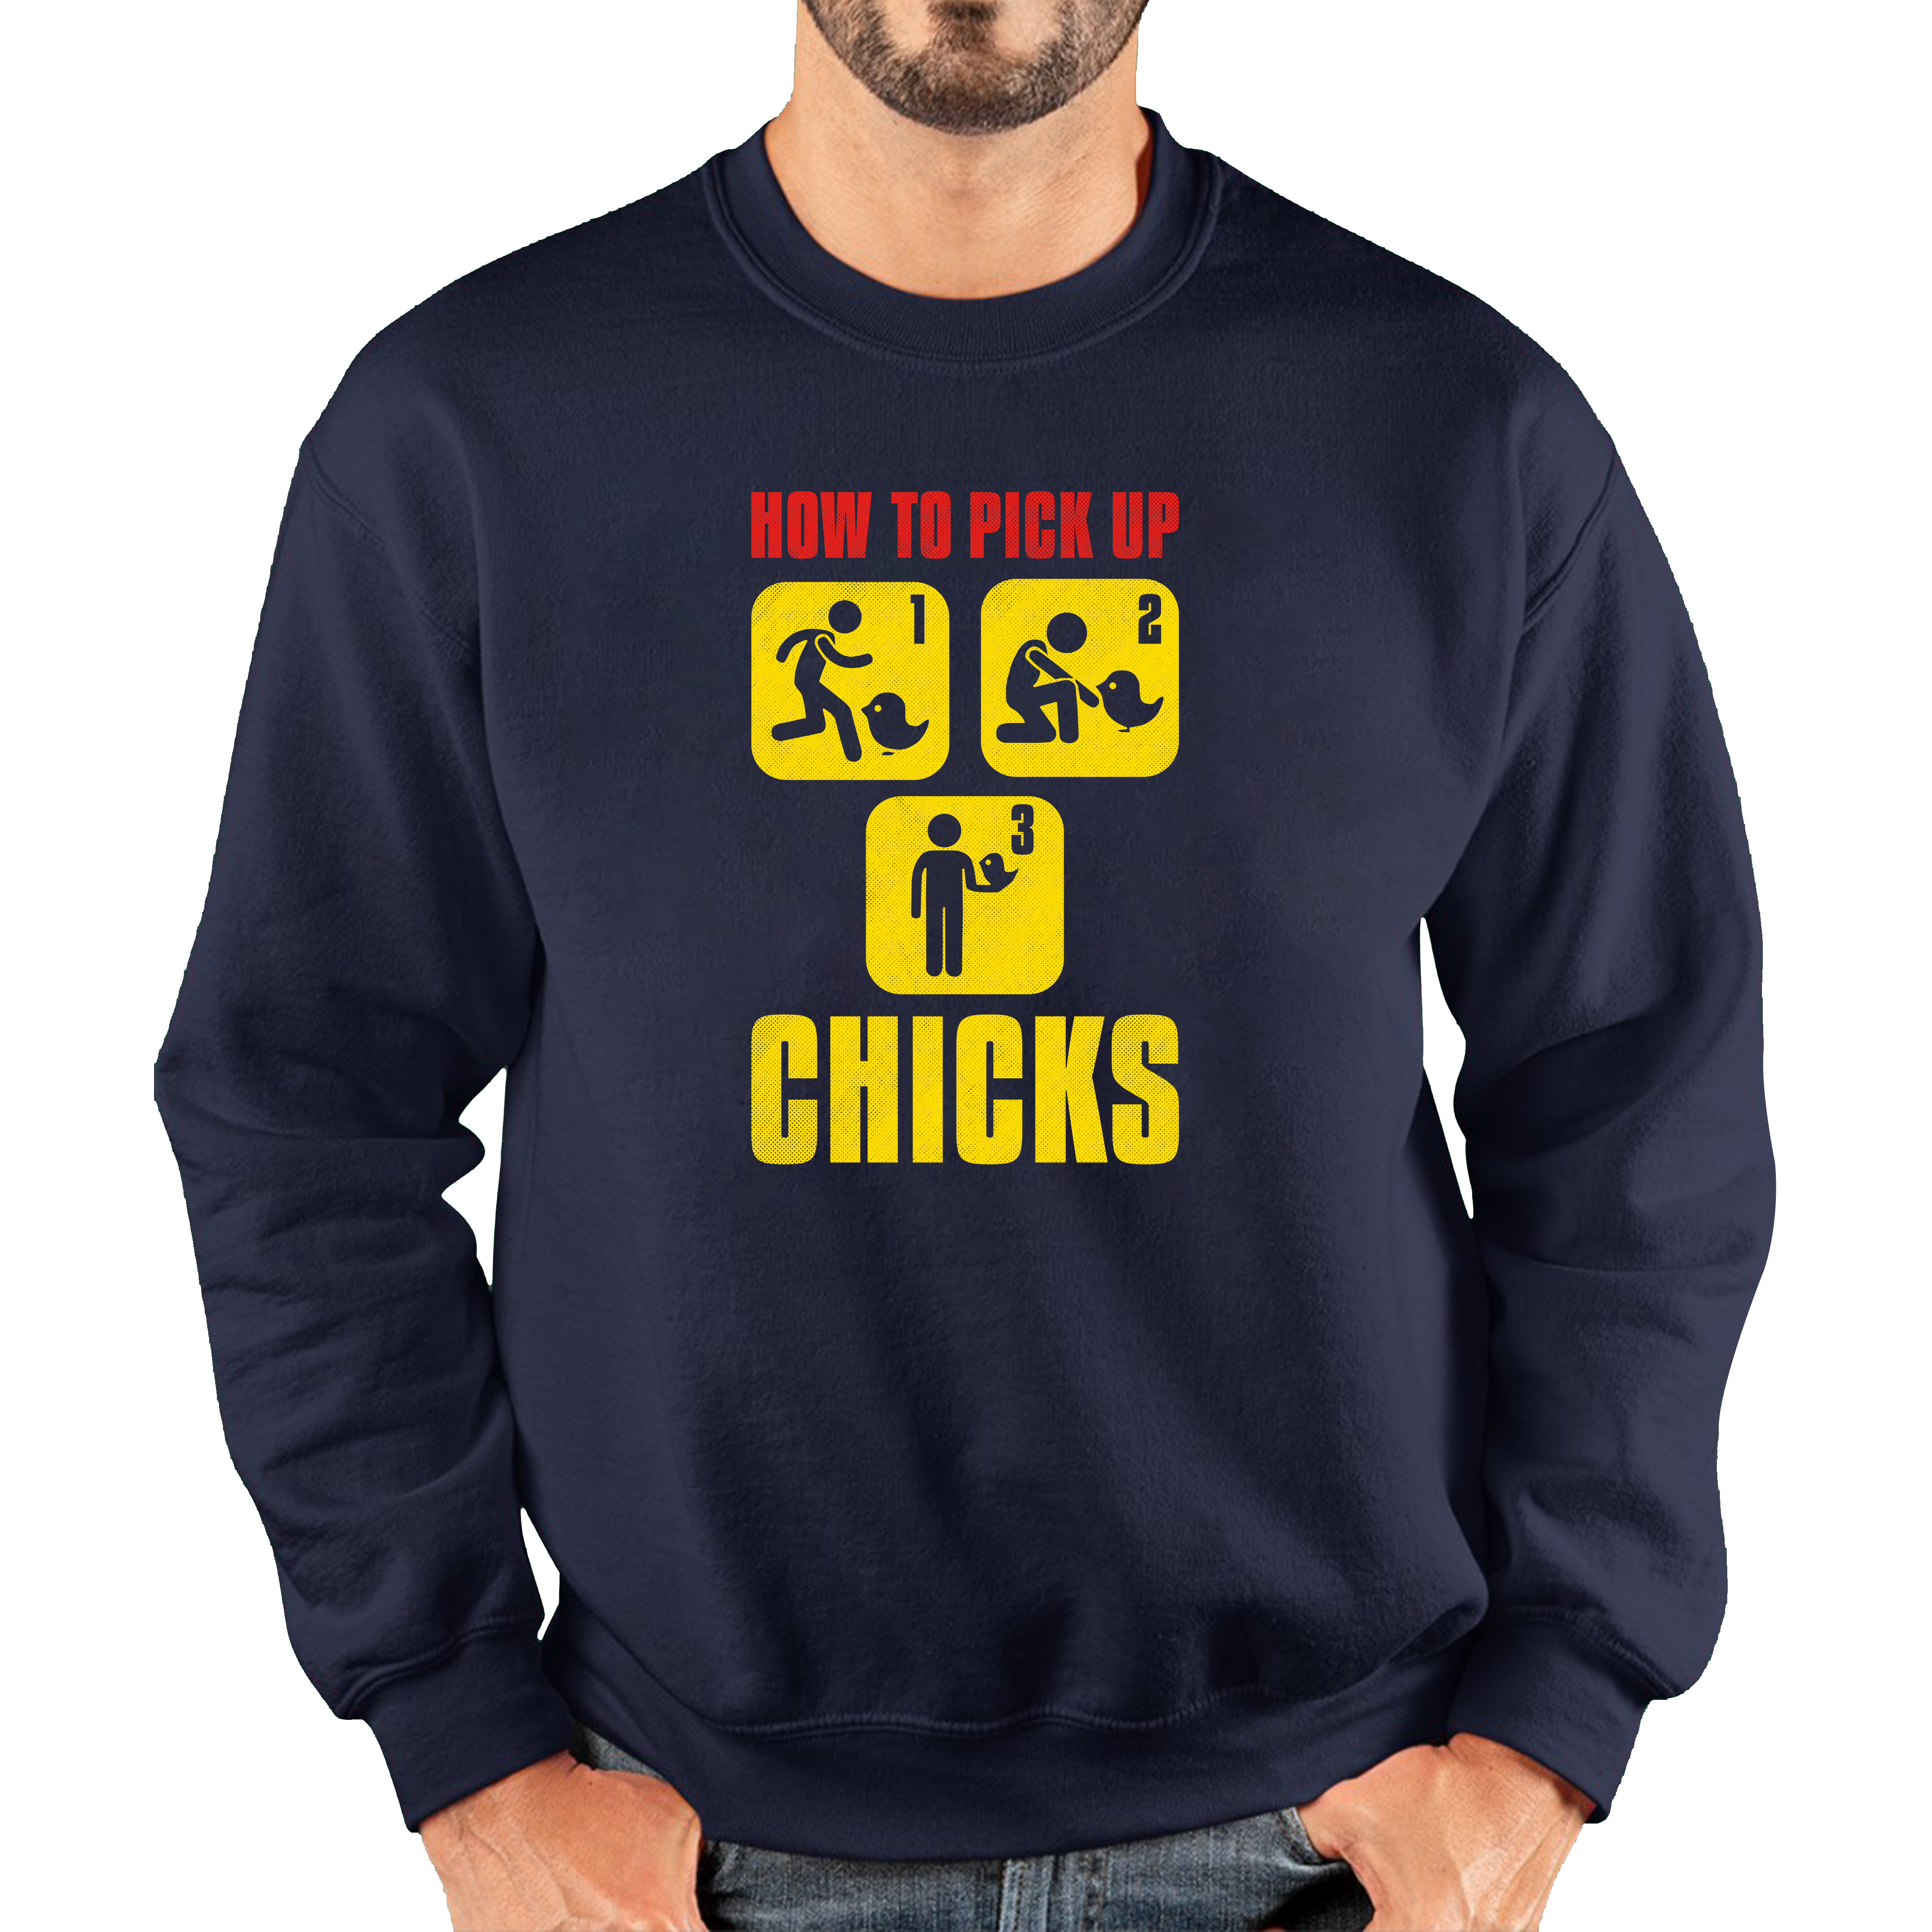 How To Pickup The Chicks Jumper Funny Cute Birds Lovers Chicks Unisex Sweatshirt